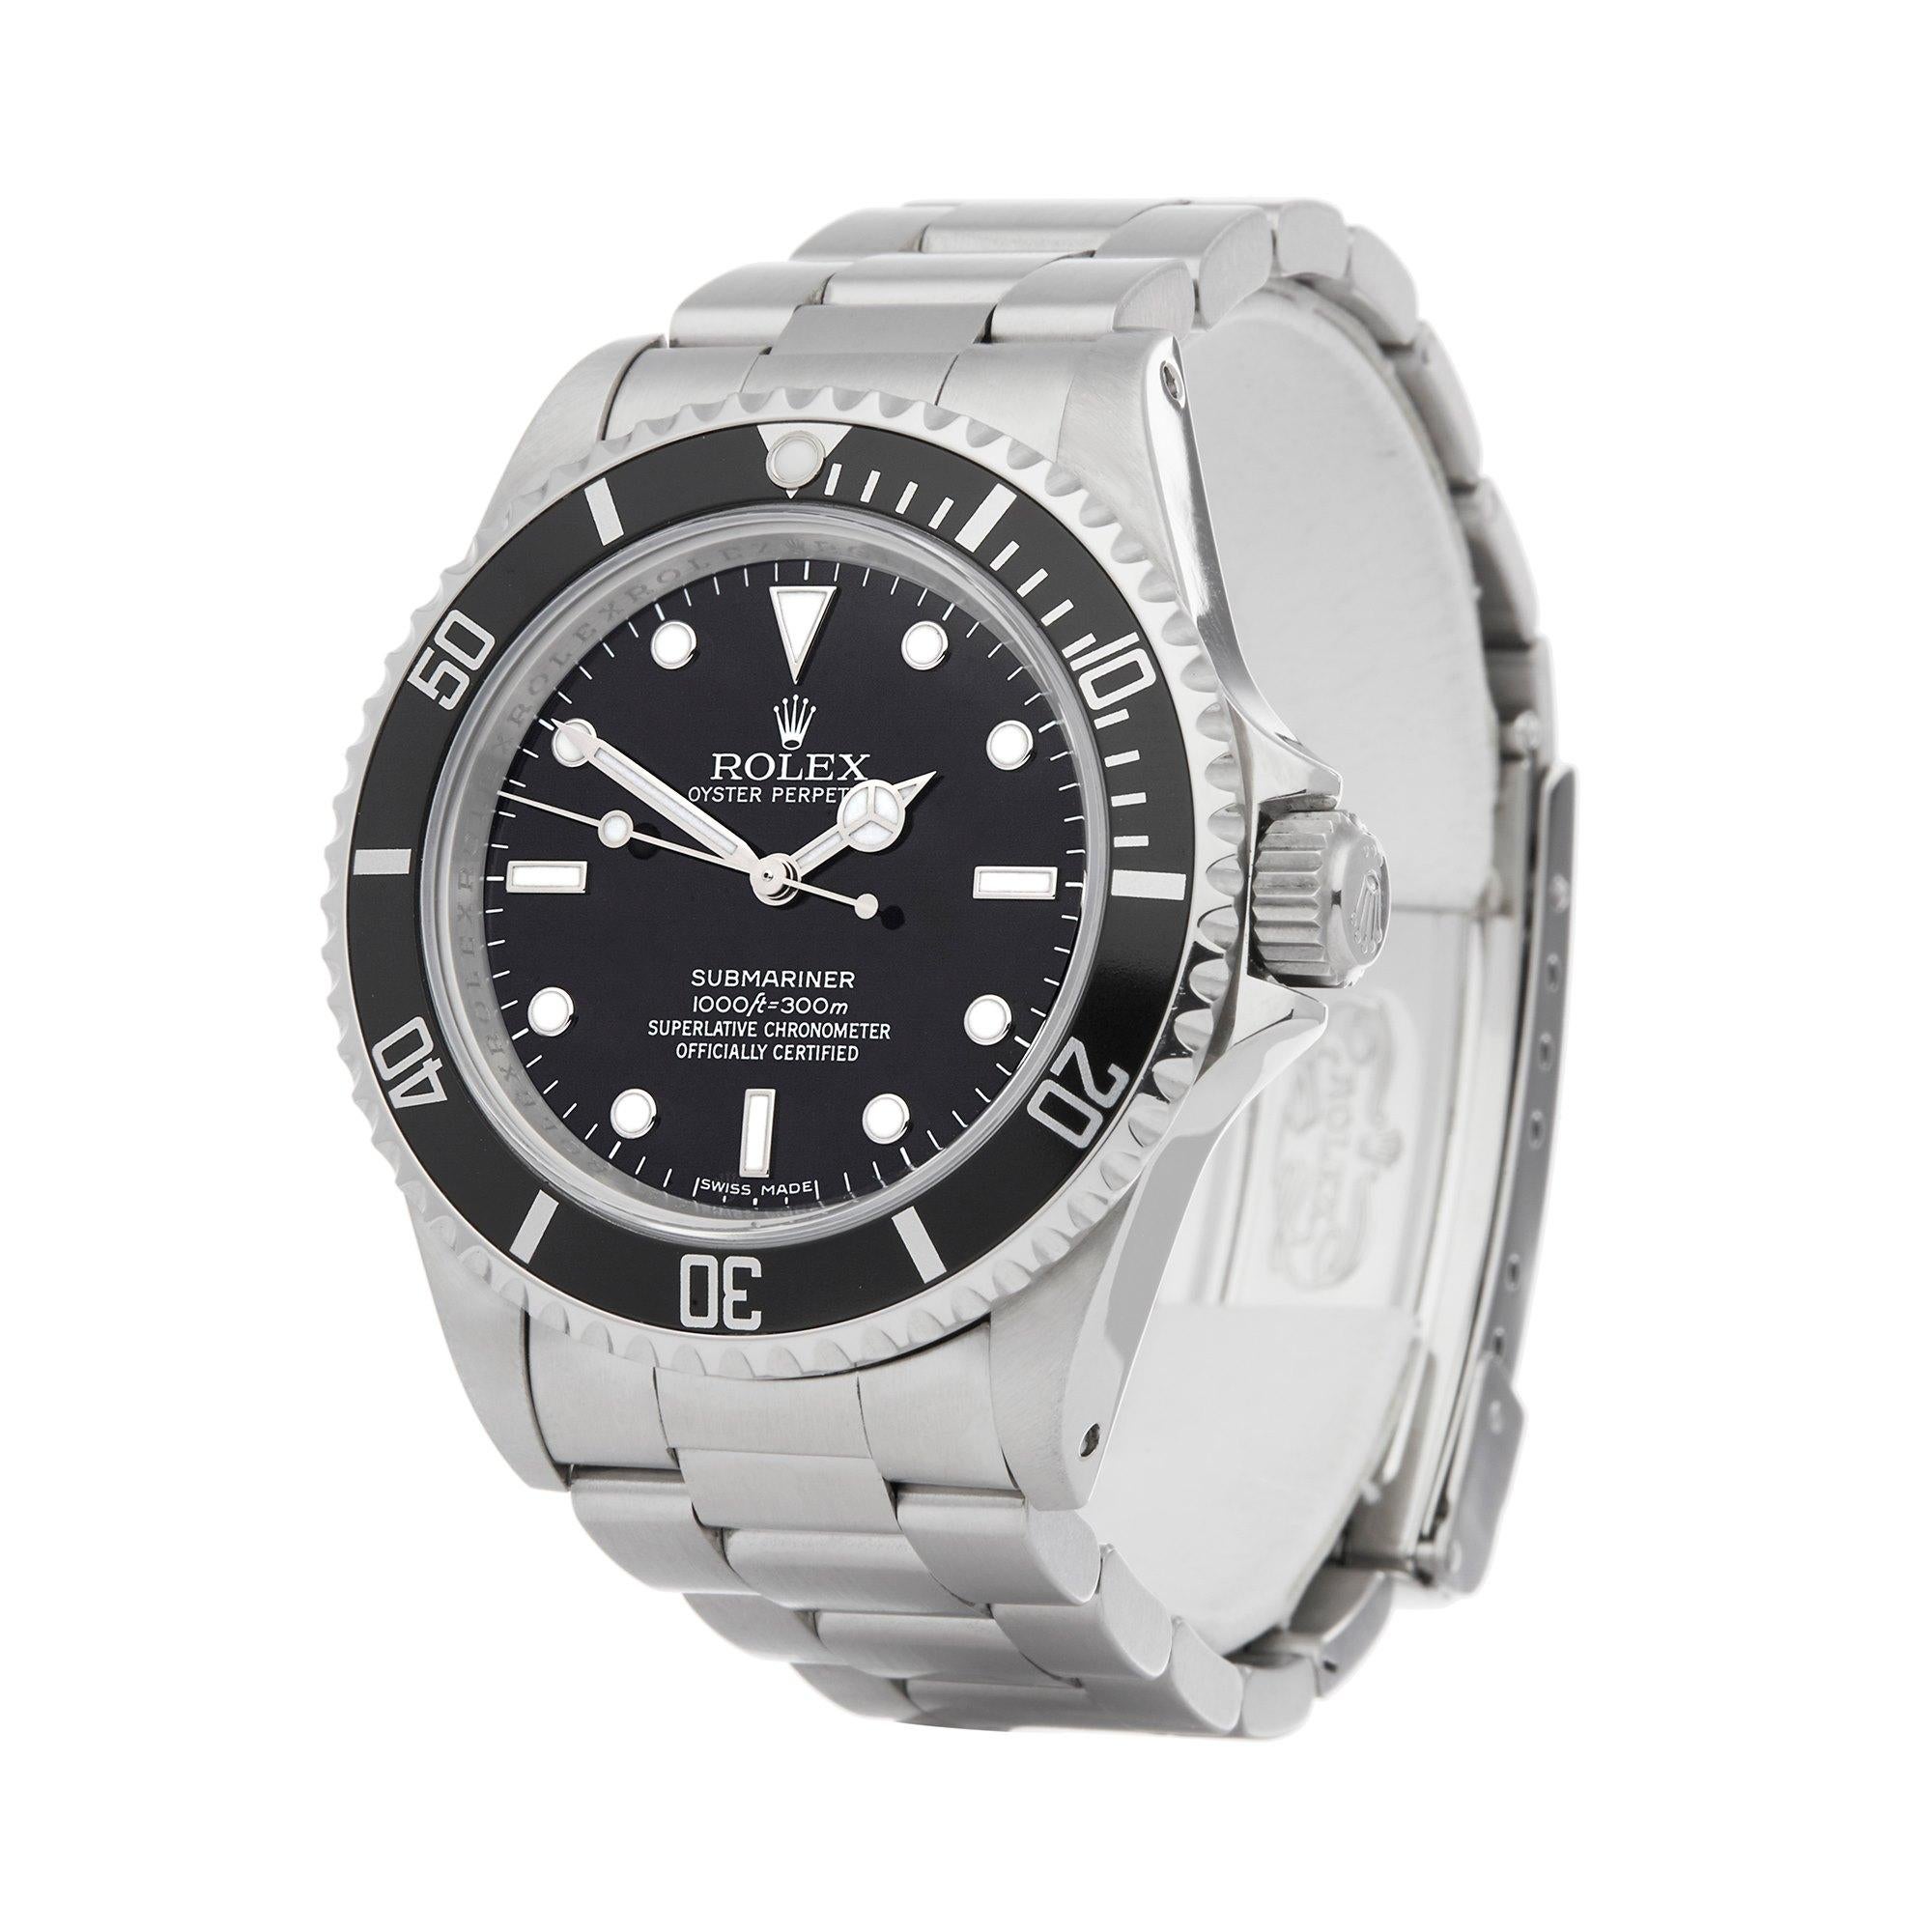 Xupes Reference: W007135
Manufacturer: Rolex
Model: Submariner
Model Variant: No Date
Model Number: 14060M
Age: 05-03-2008
Gender: Men
Complete With: Xupes Presentation Box & Guarantee 
Dial: Black Other
Glass: Sapphire Crystal
Case Size: 40mm
Case